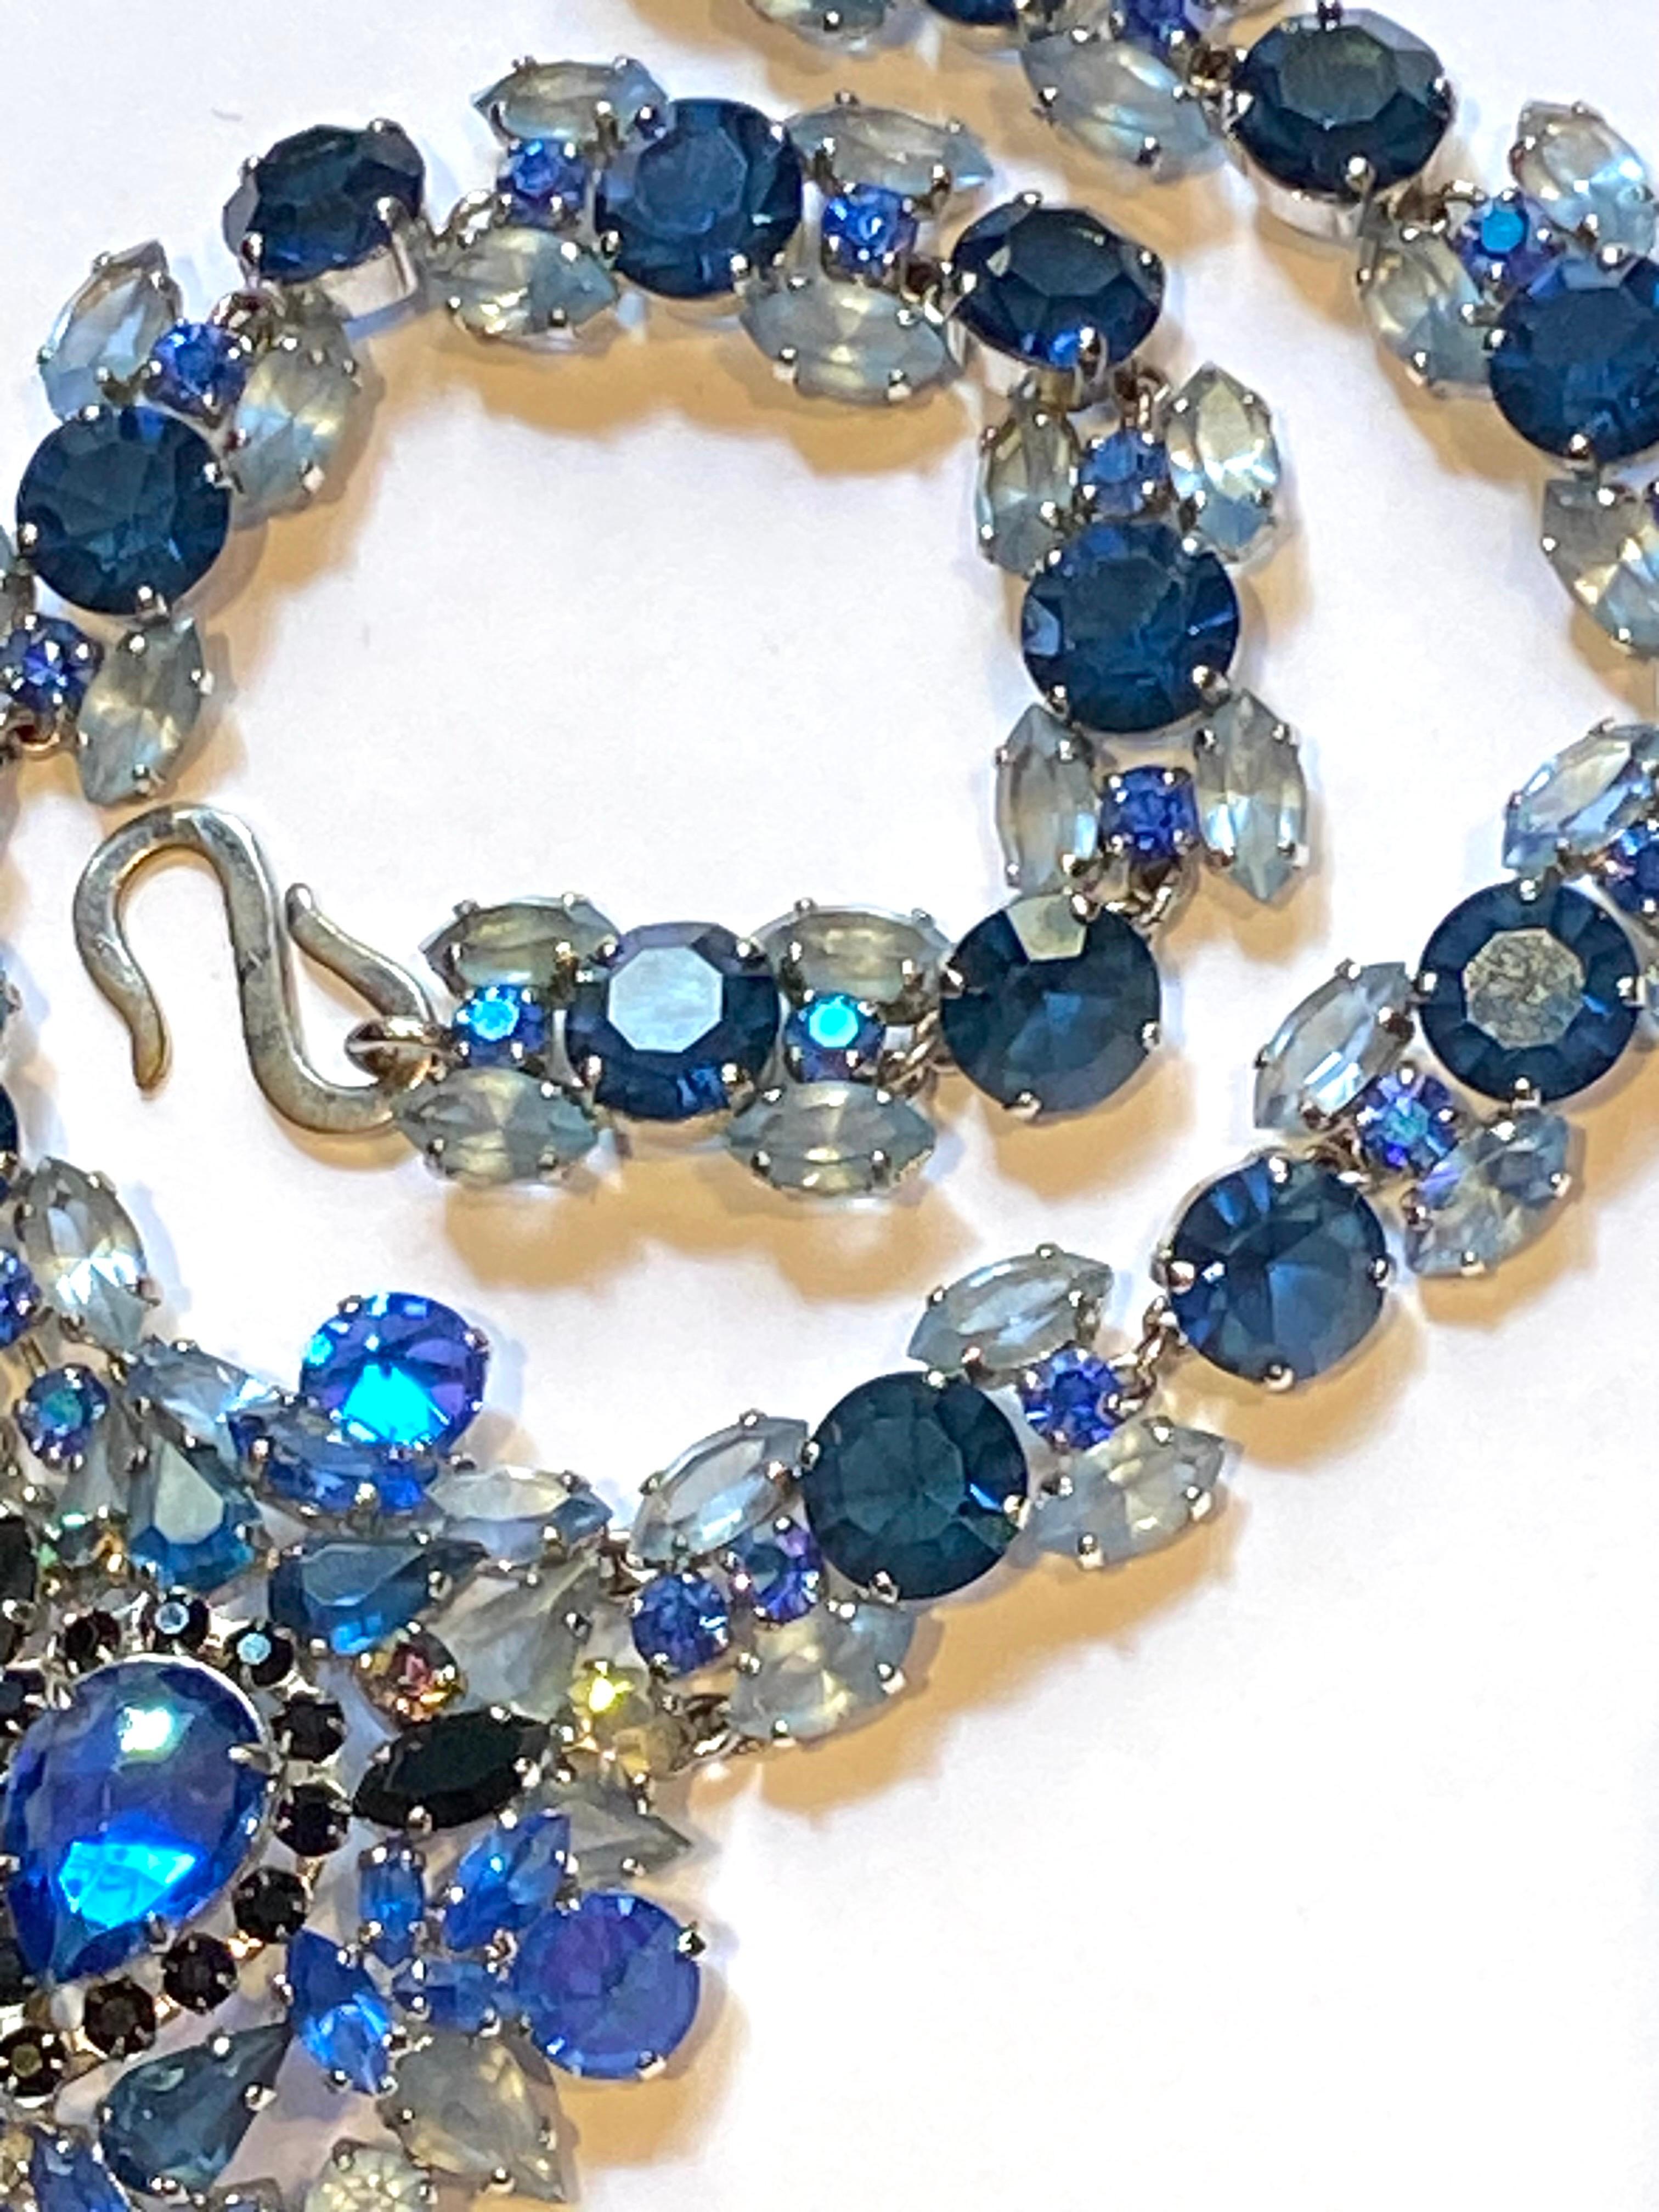 Christian Dior 1959 Shades of Blue Rhinestone Necklace by Henkel & Grosse' 1